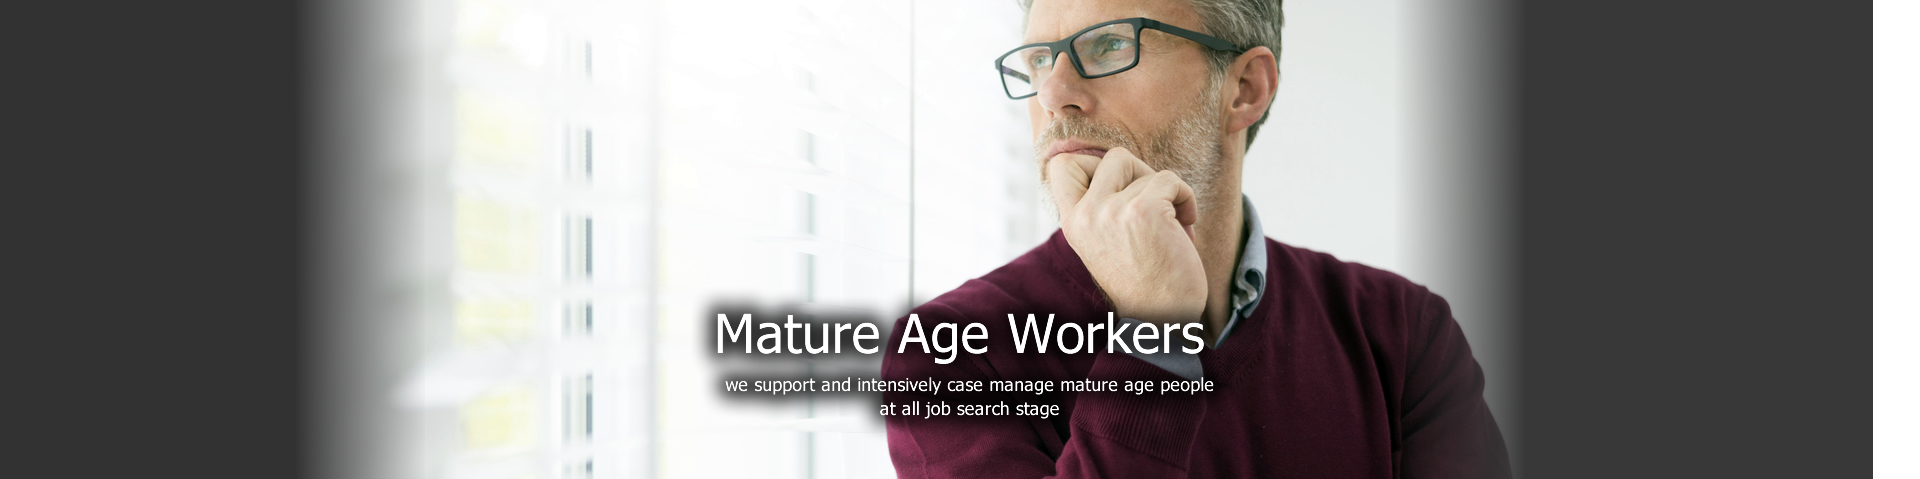 mature age workers